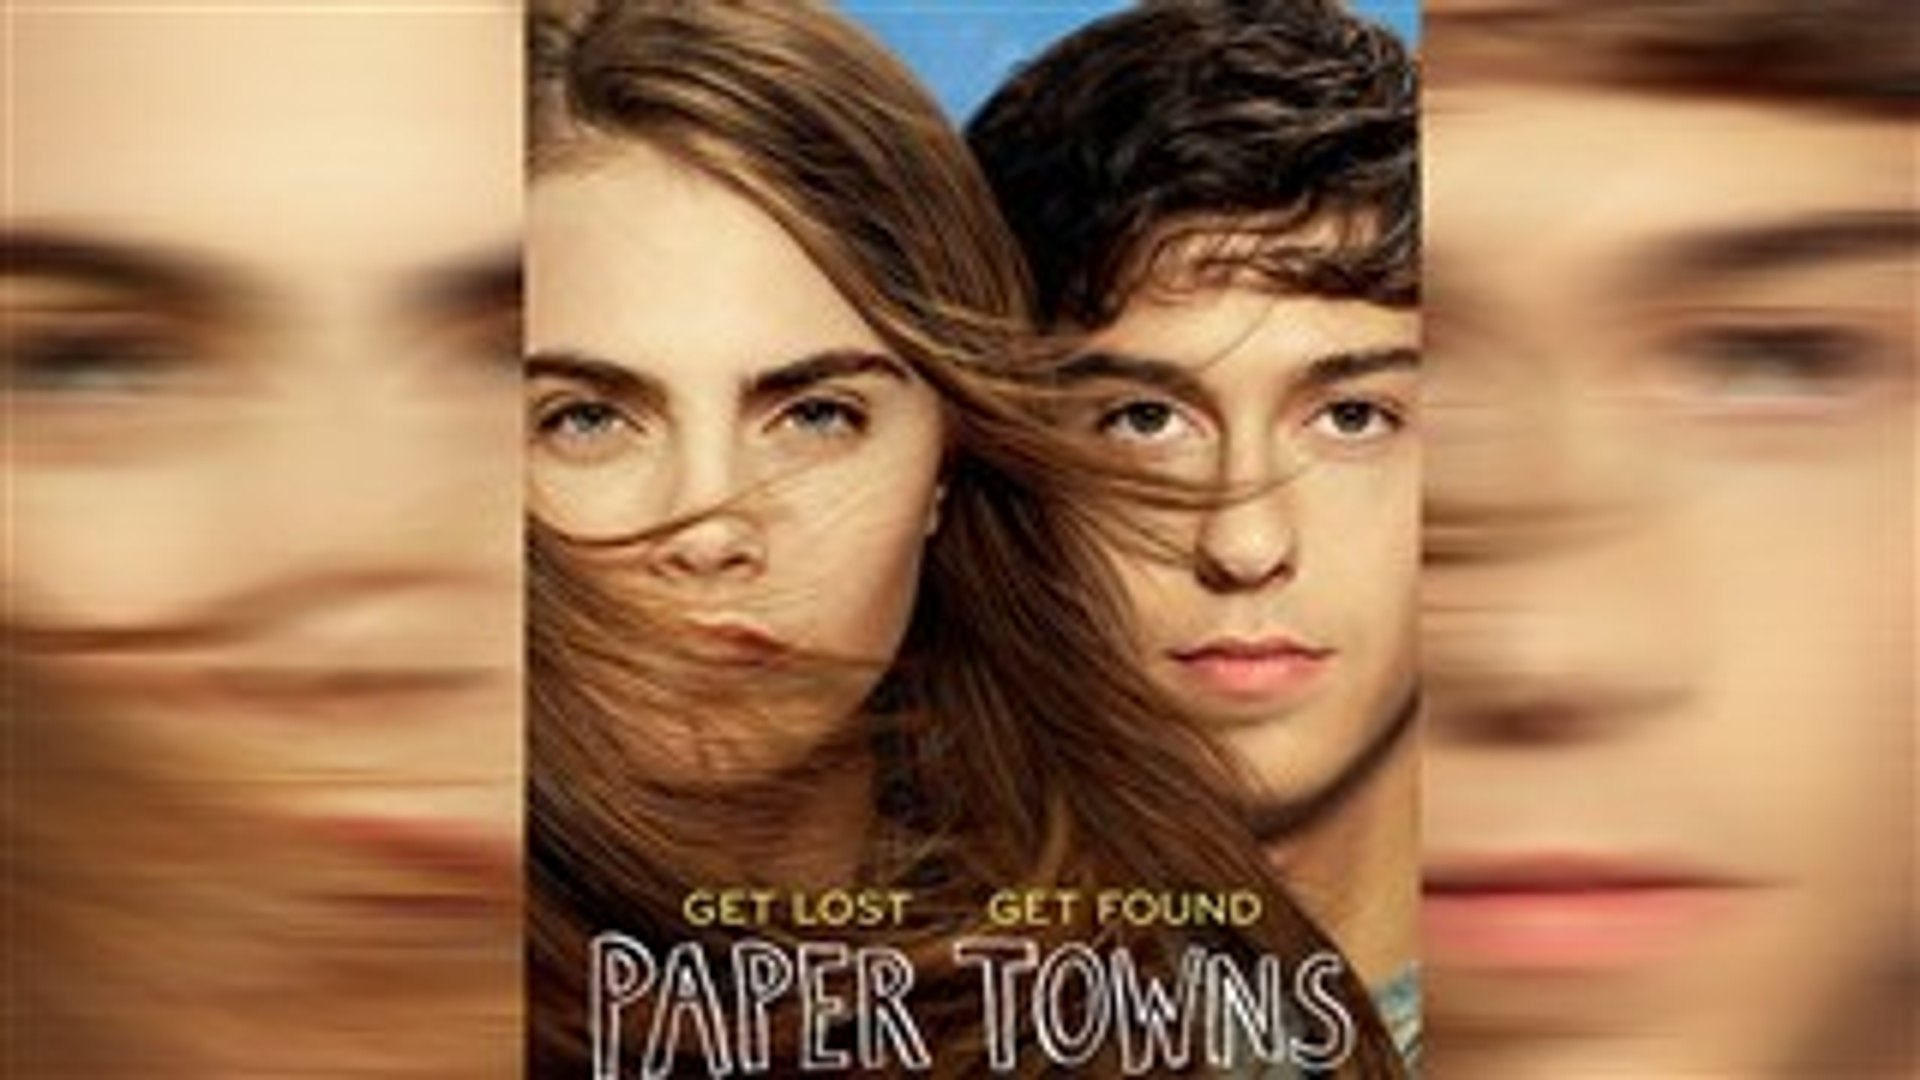 Watch Paper Towns Full Movie Online 1080p Hd Streaming Video Dailymotion